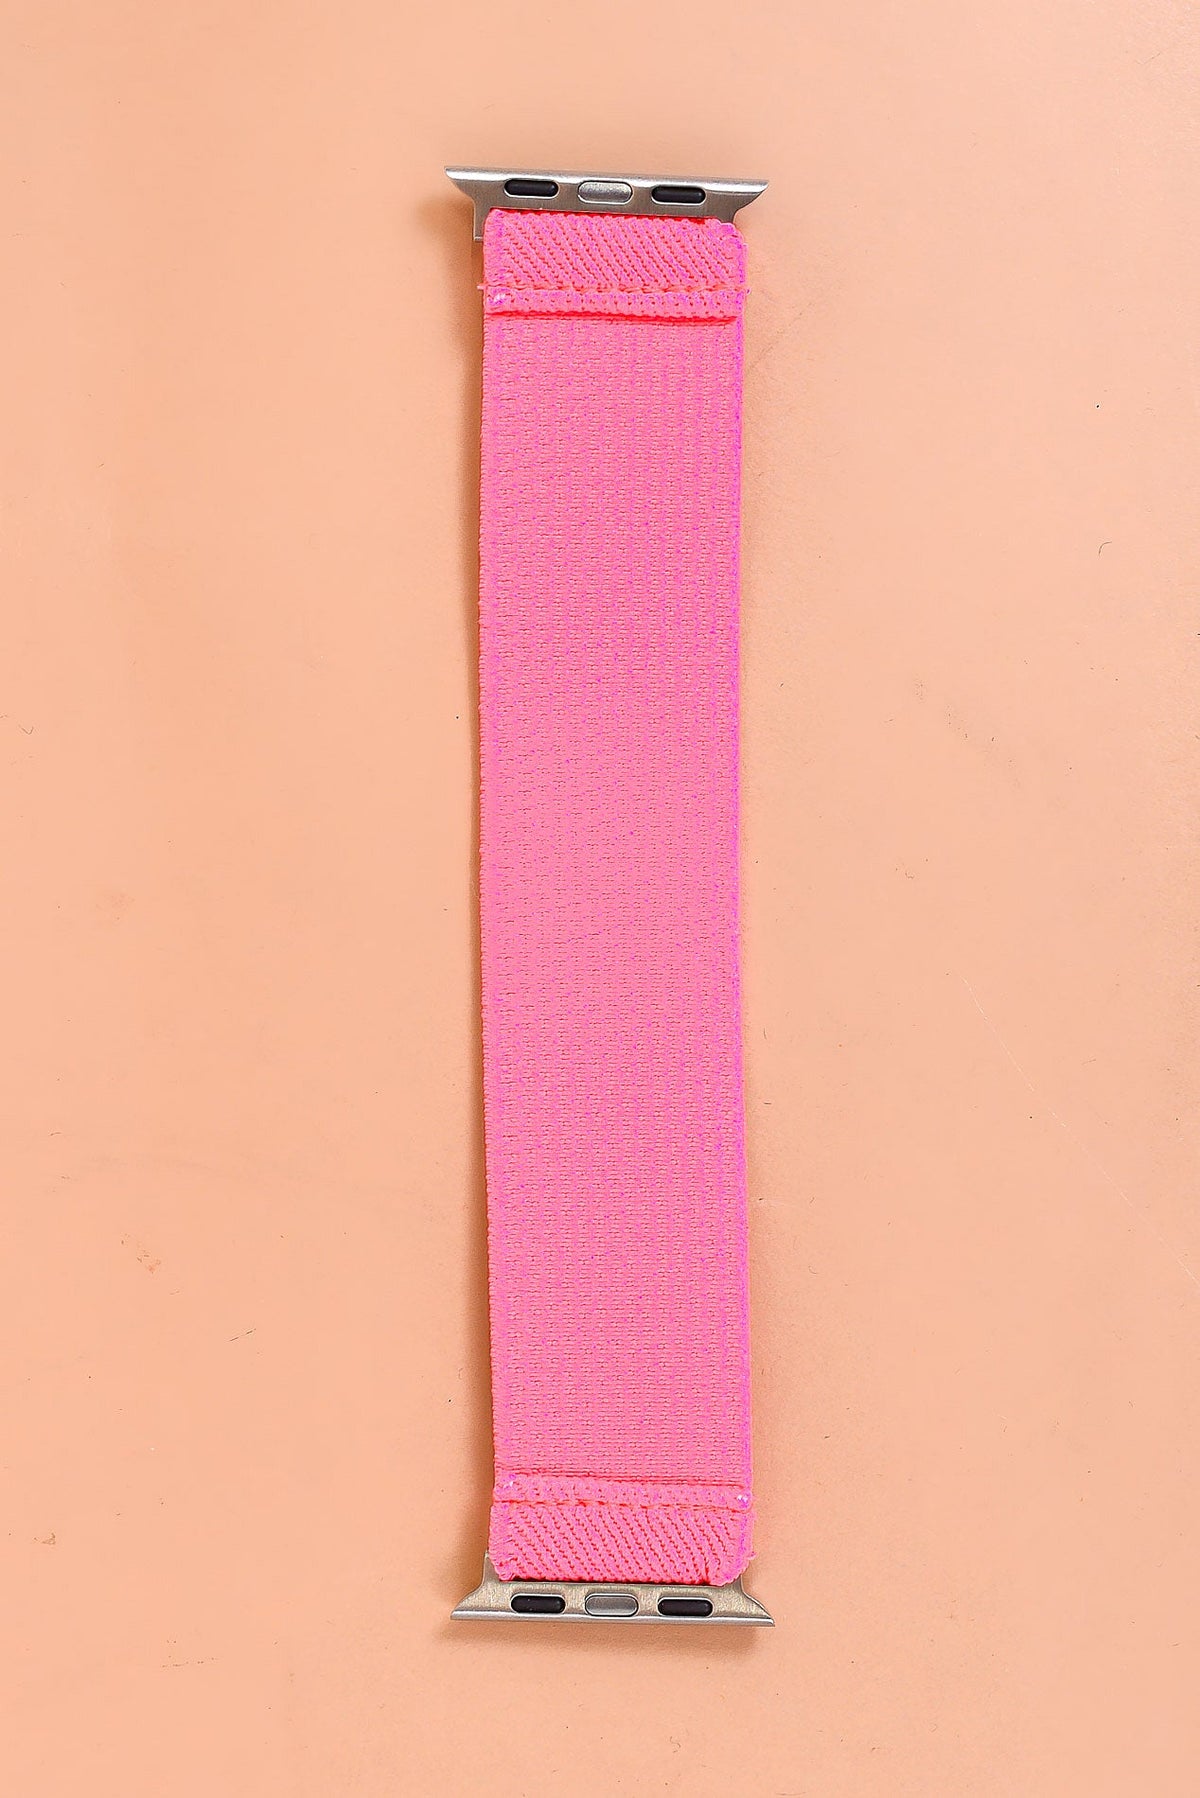 Neon Pink Stretchy Apple Watch Band (38/40MM) - WB042NPK